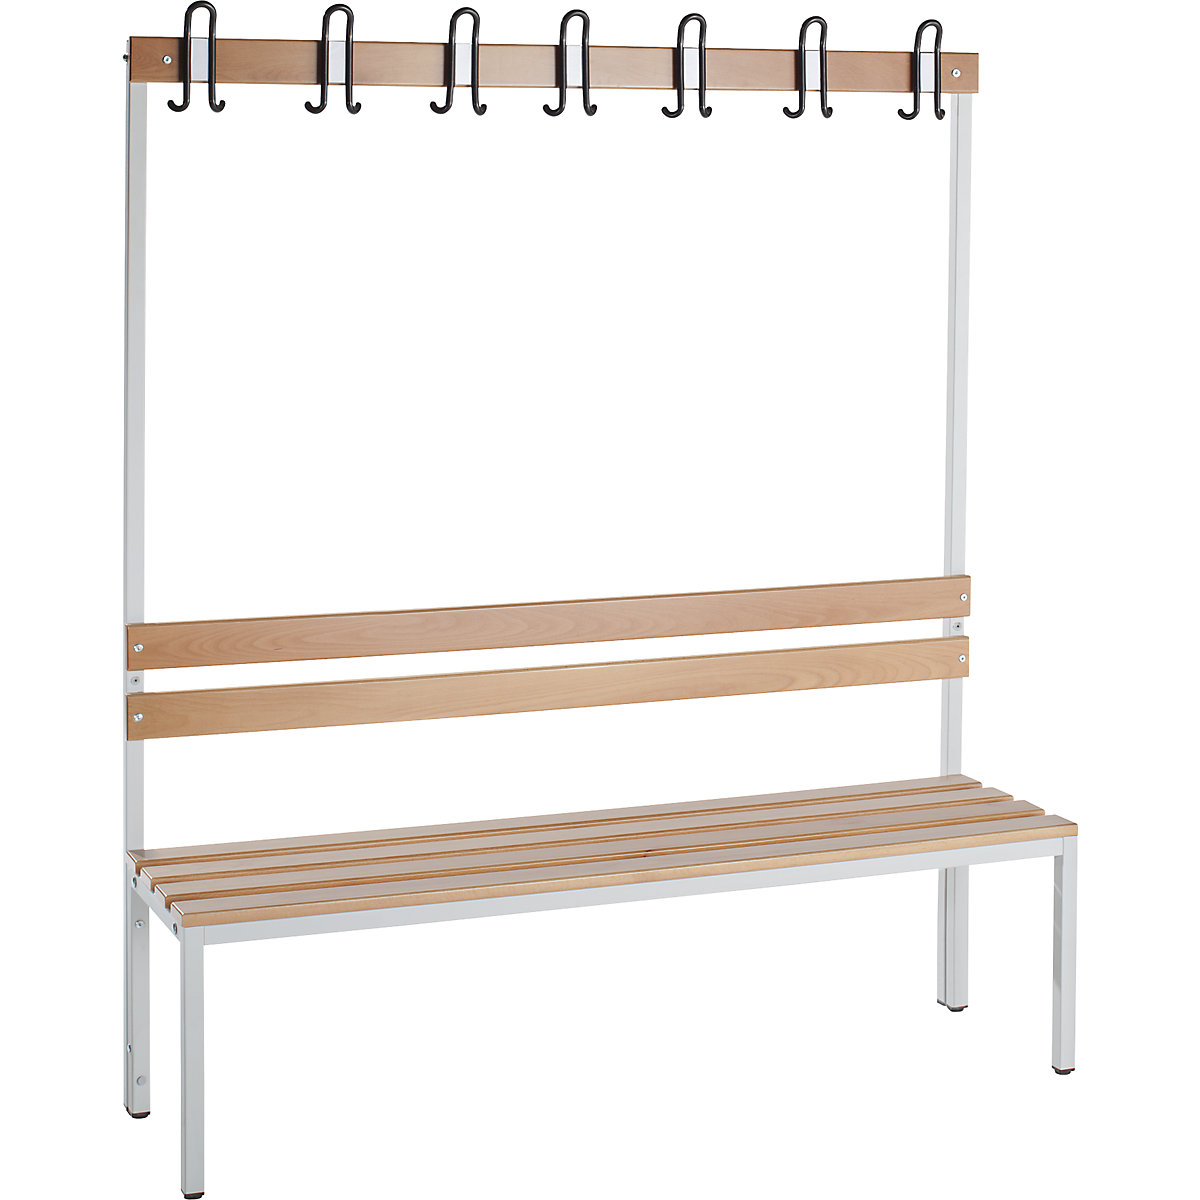 Beech cloakroom bench – eurokraft basic, single sided with back rest, HxD 1700 x 430 mm, length 1500 mm-4